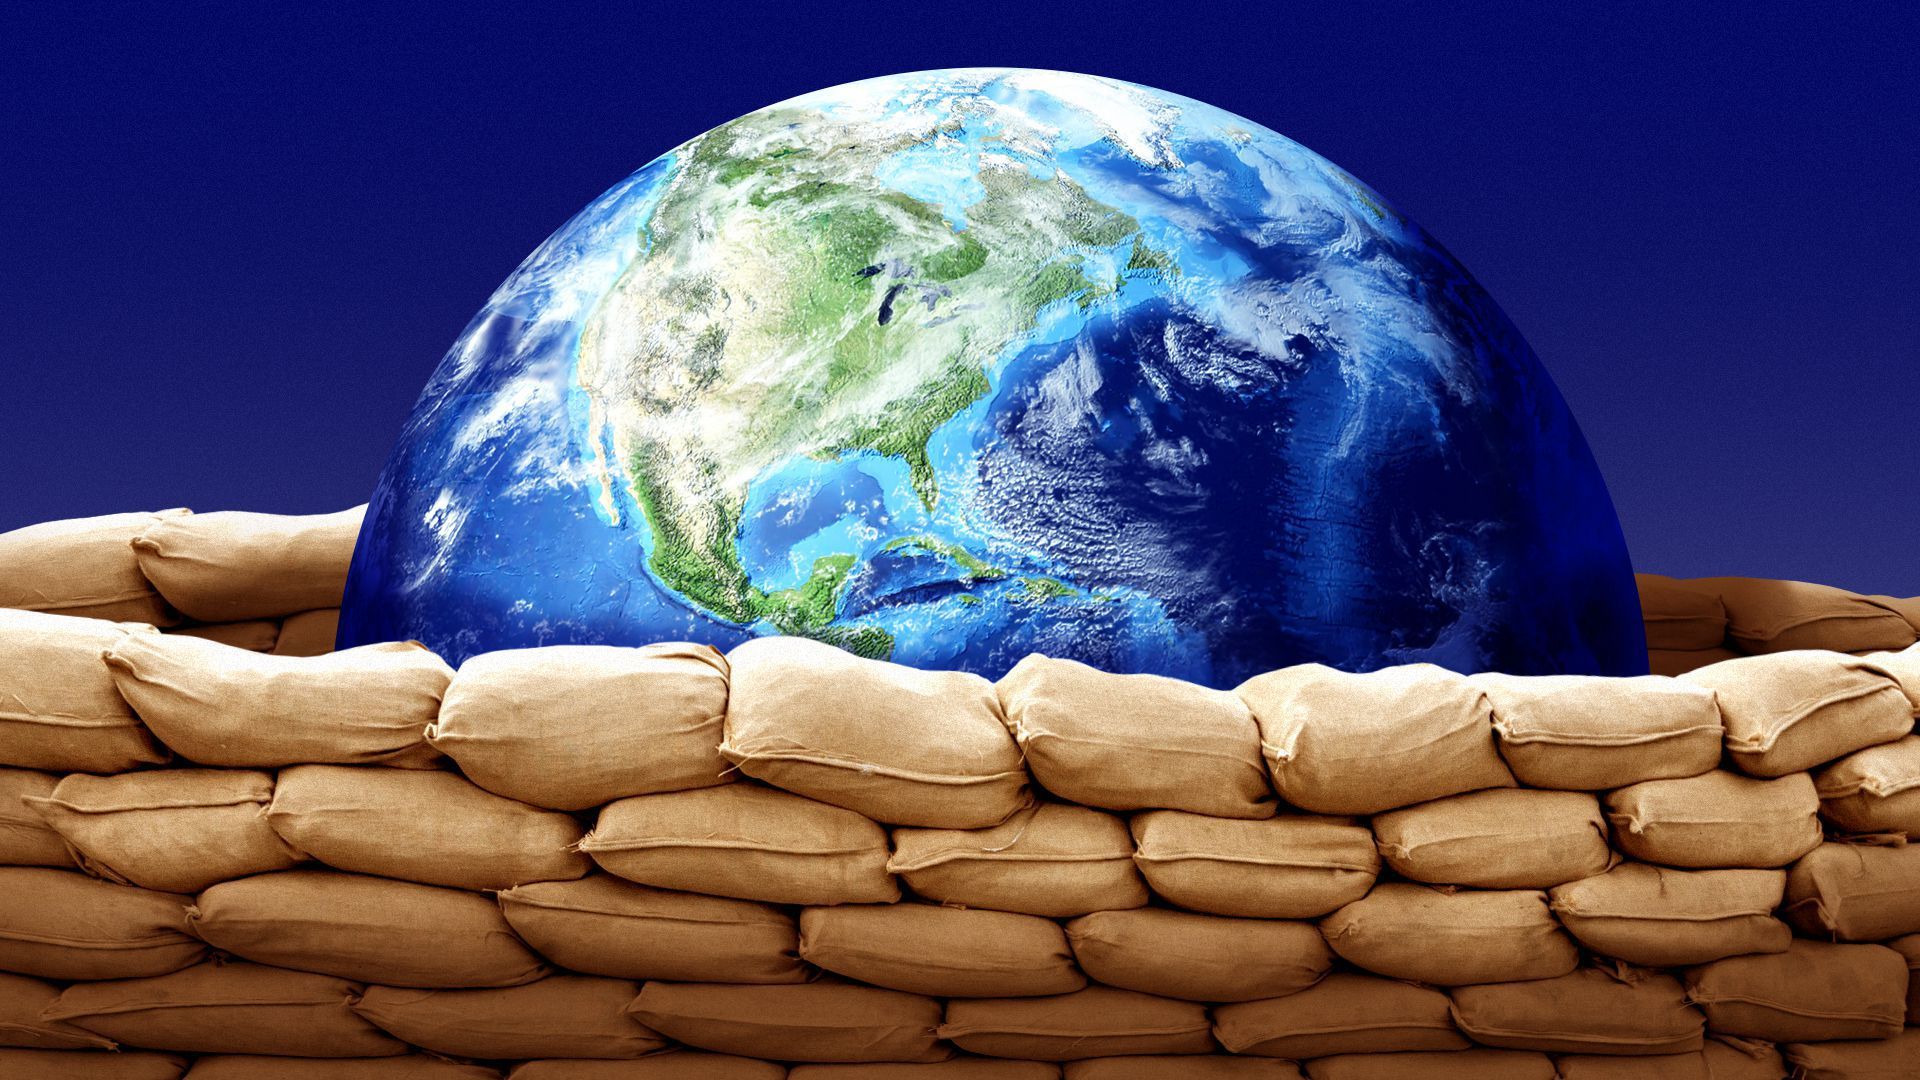 The planet Earth with sandbags around it.